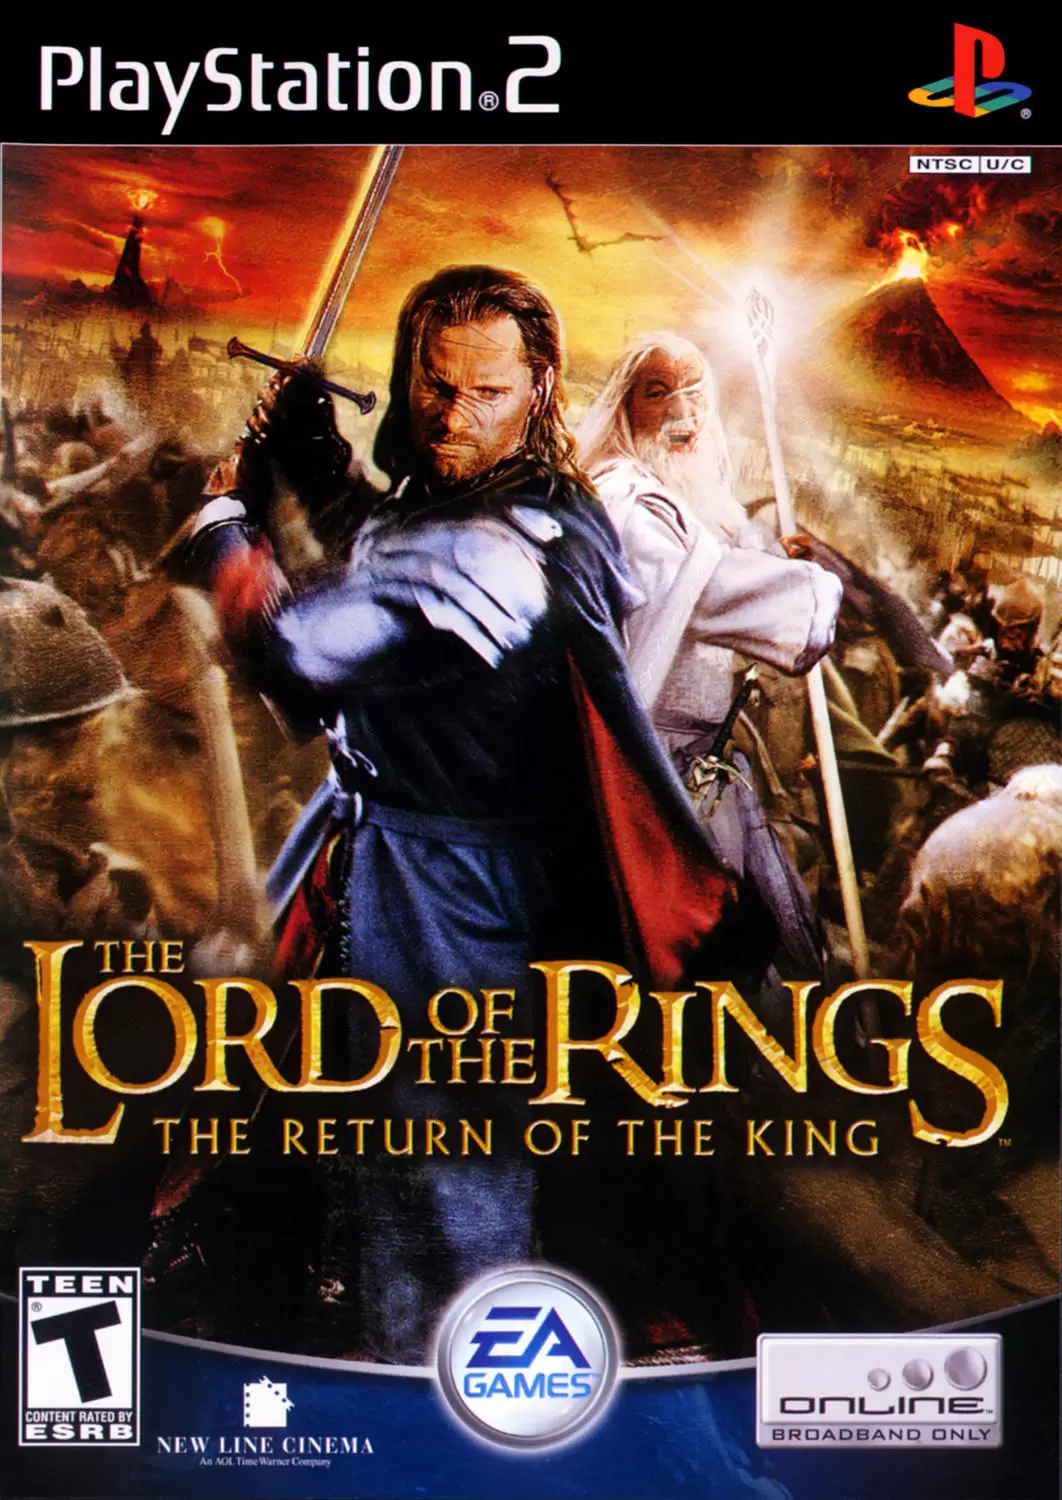 PS2 Games - The Lord of the Rings: The Return of the King